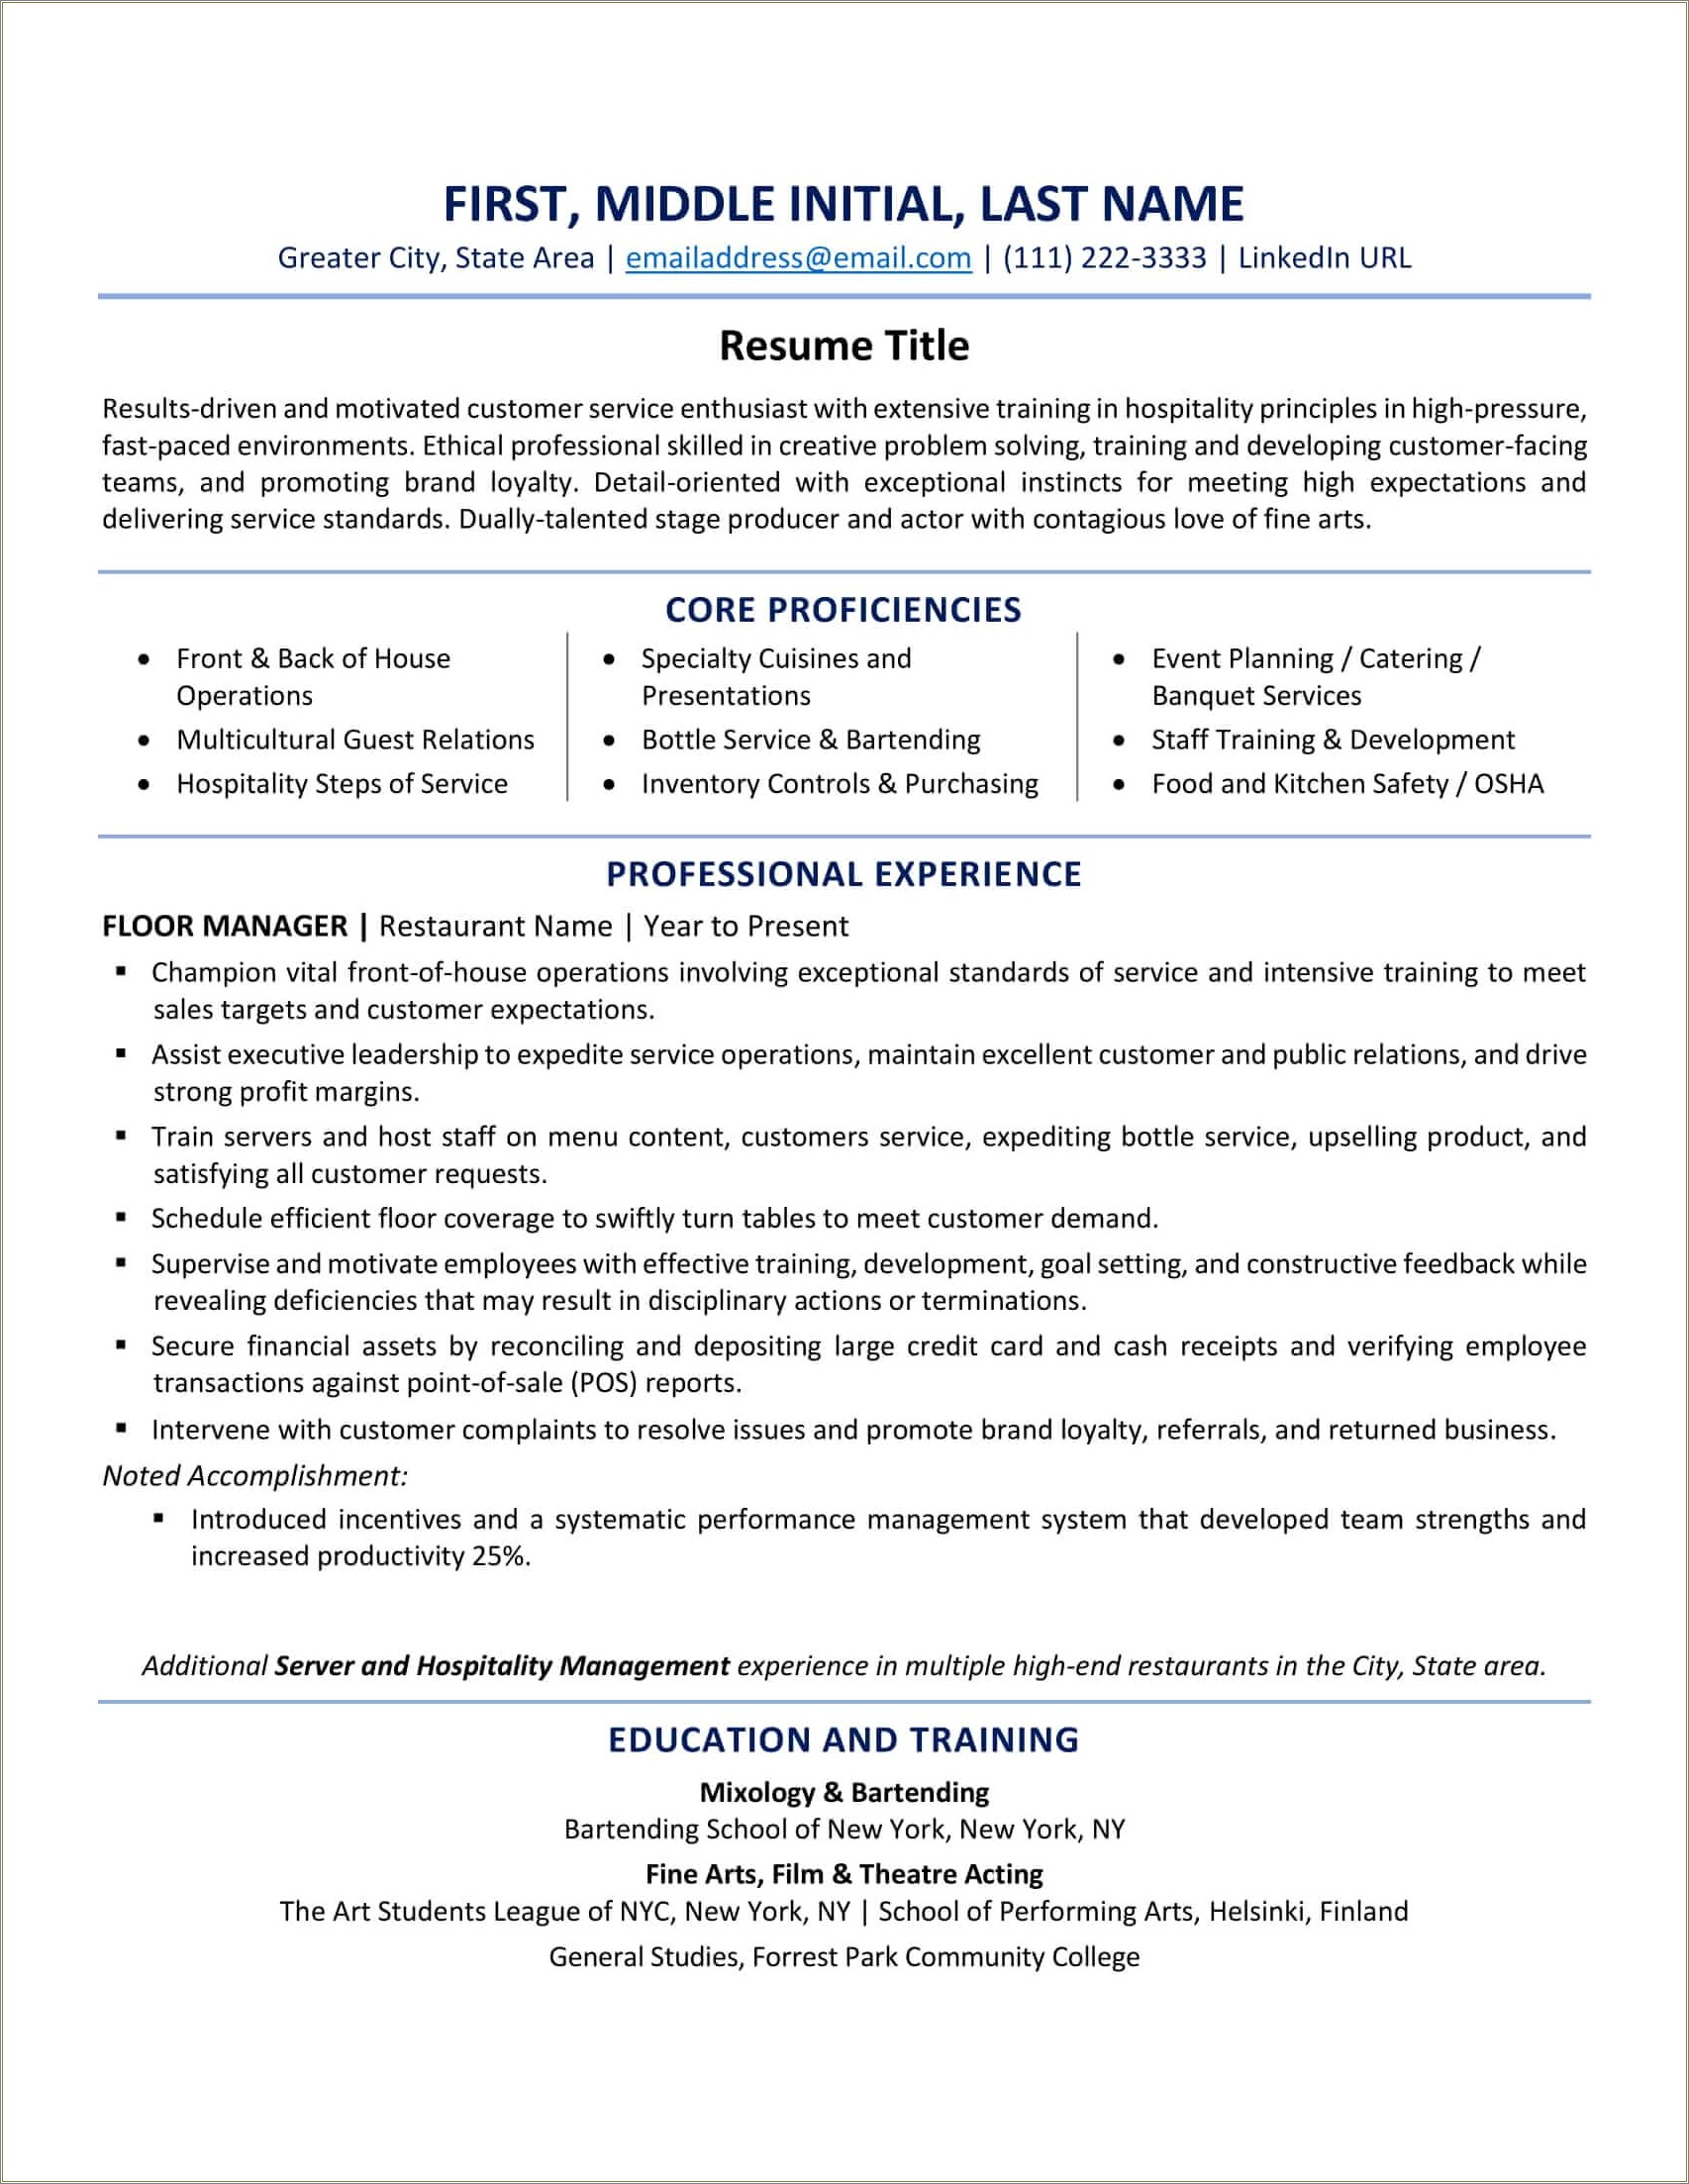 resume-examples-for-older-adults-resume-example-gallery